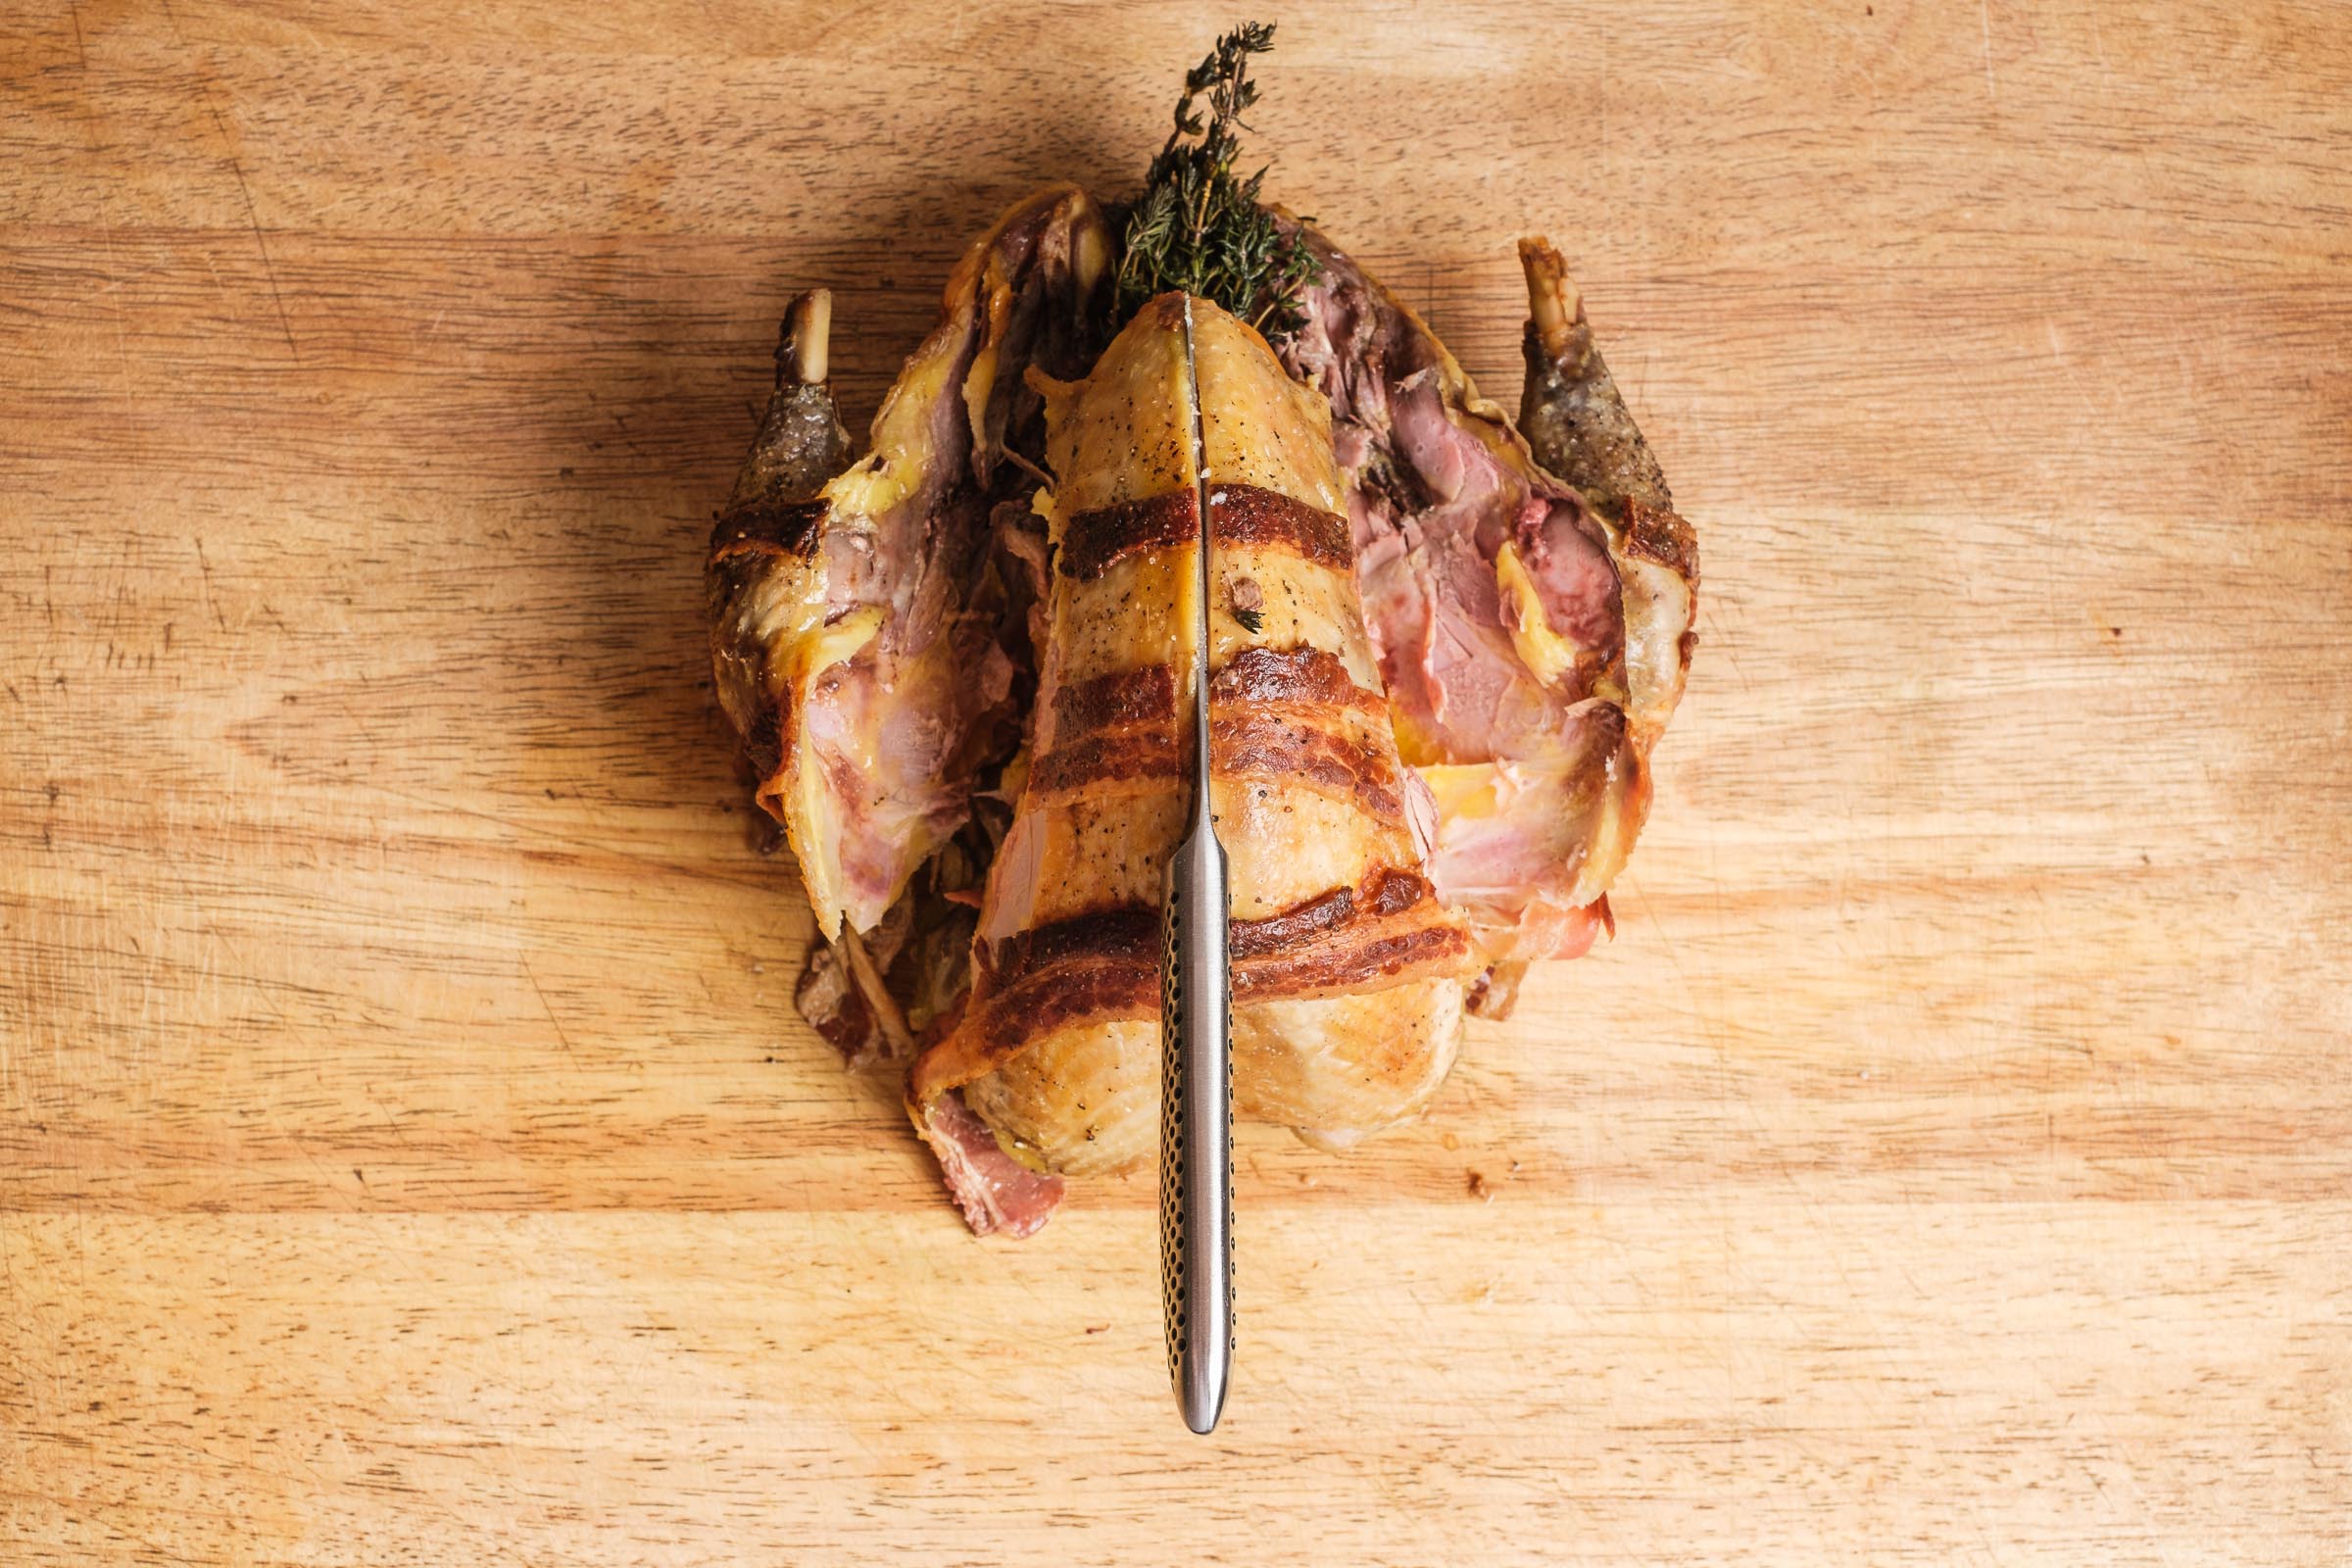 Score the pheasant breast on the sternum